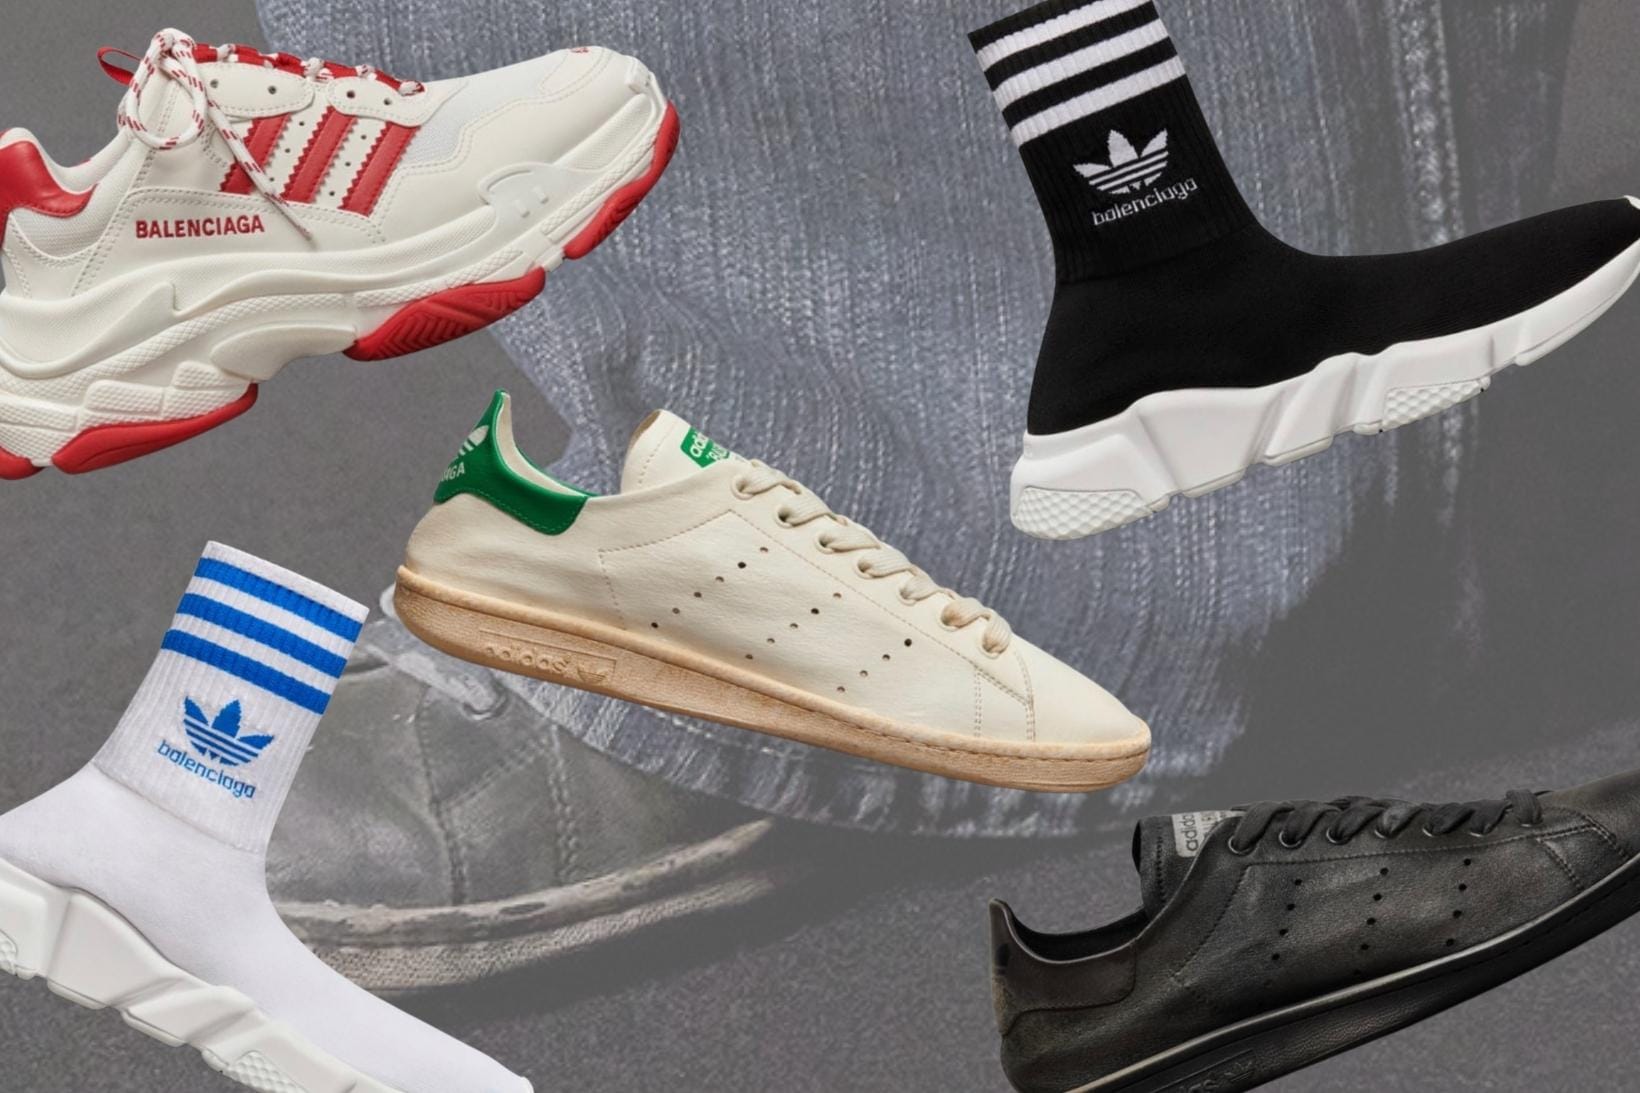 Chris Lambert narrative expert on Twitter The Balenciaga x Adidas collab  already dropped and the prices are truly disgusting  httpstcoyvMjtIr4ra  Twitter